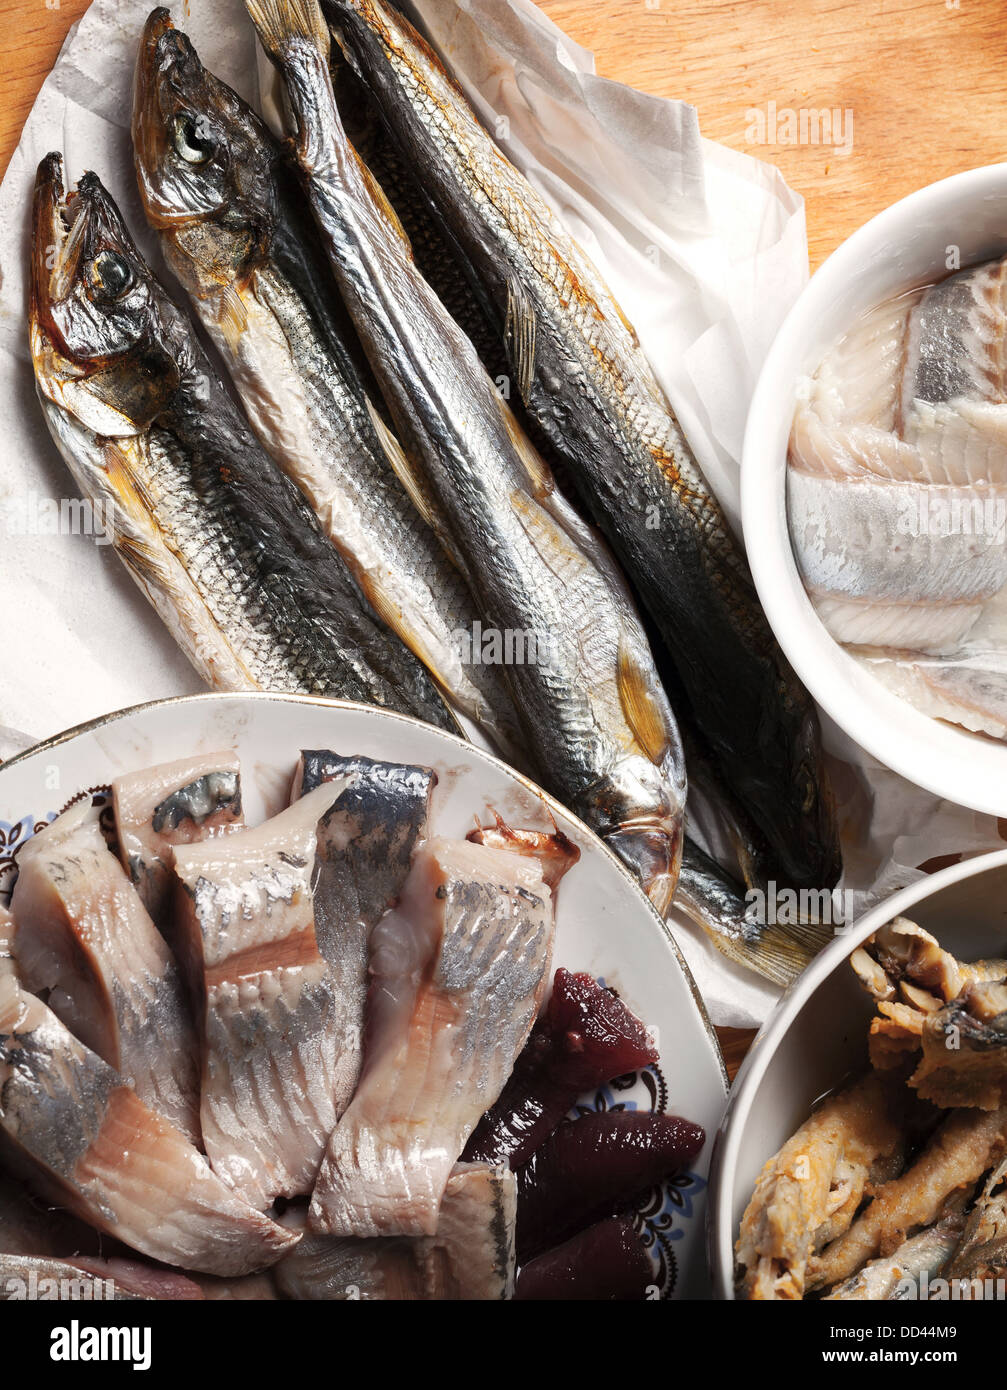 Seafood theme. Assorted fish on wooden table. Top view Stock Photo